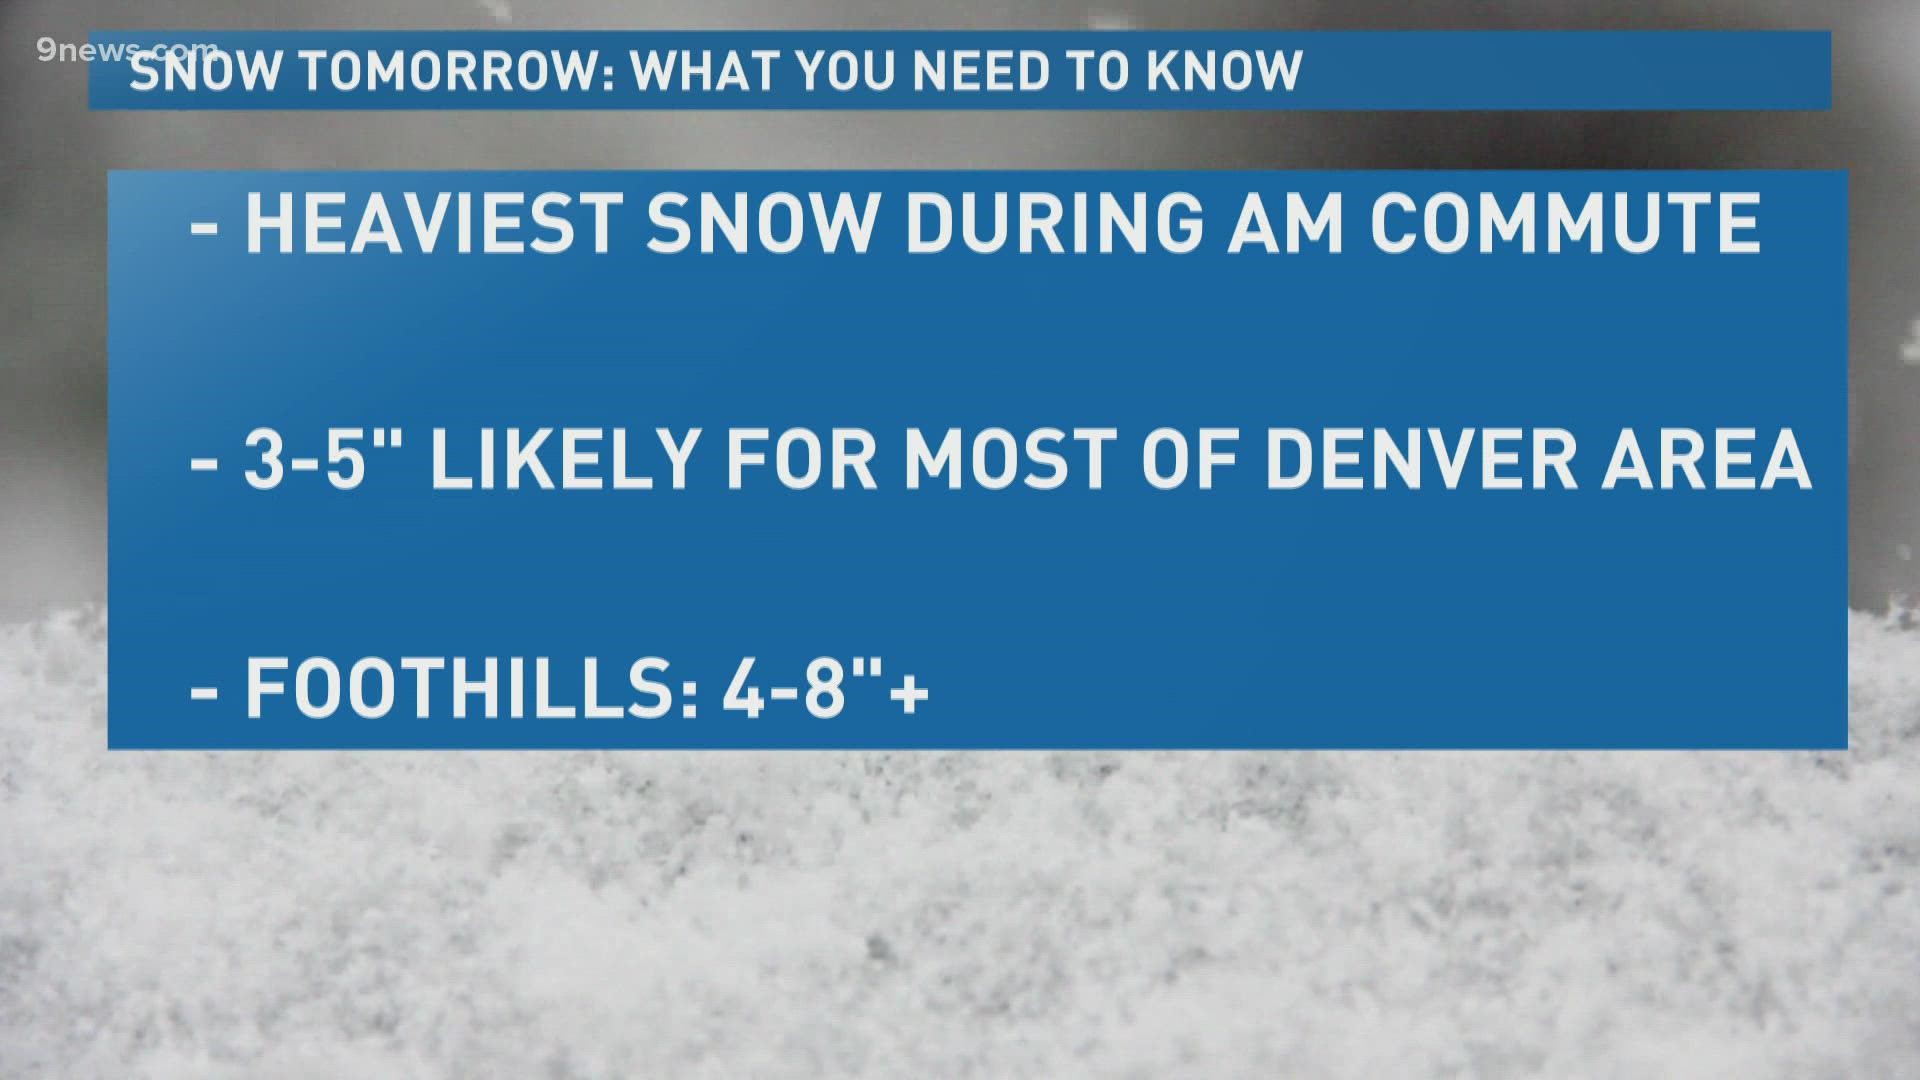 Meteorologist Chris Bianchi details what we can expect from the latest round of snow making its way to Colorado.